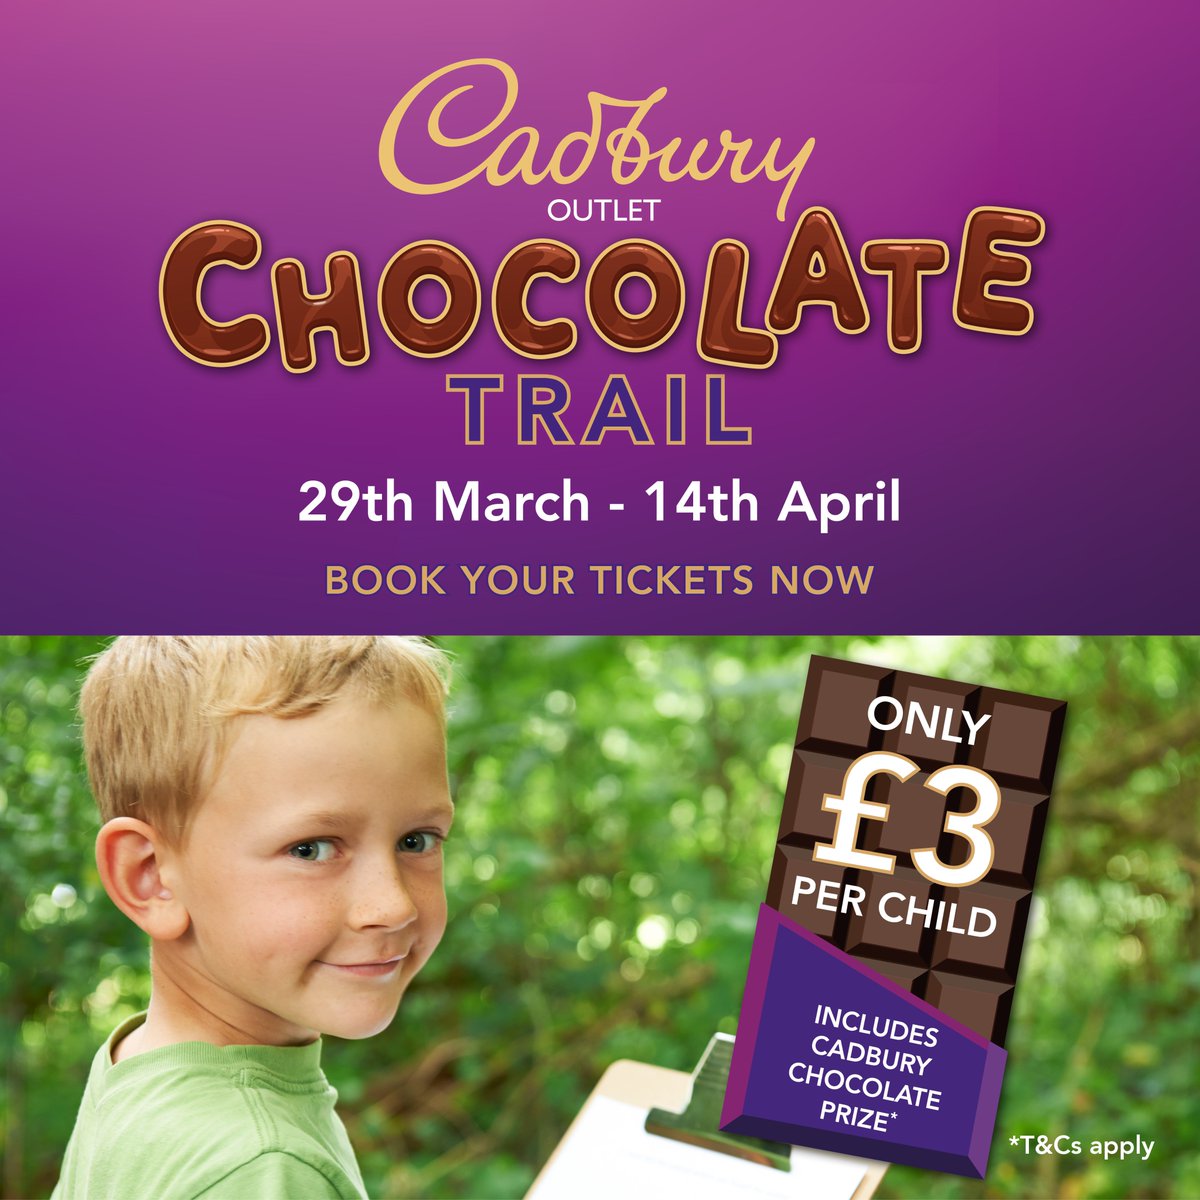 🌟 Due to popular demand, the CADBURY OUTLET CHOCOLATE TRAIL returns to Springfields this upcoming school Easter Holiday! Book early and you can reserve your tickets for just £3 each! 🌟 More details: springfieldsoutlet.co.uk/events/ 🍫